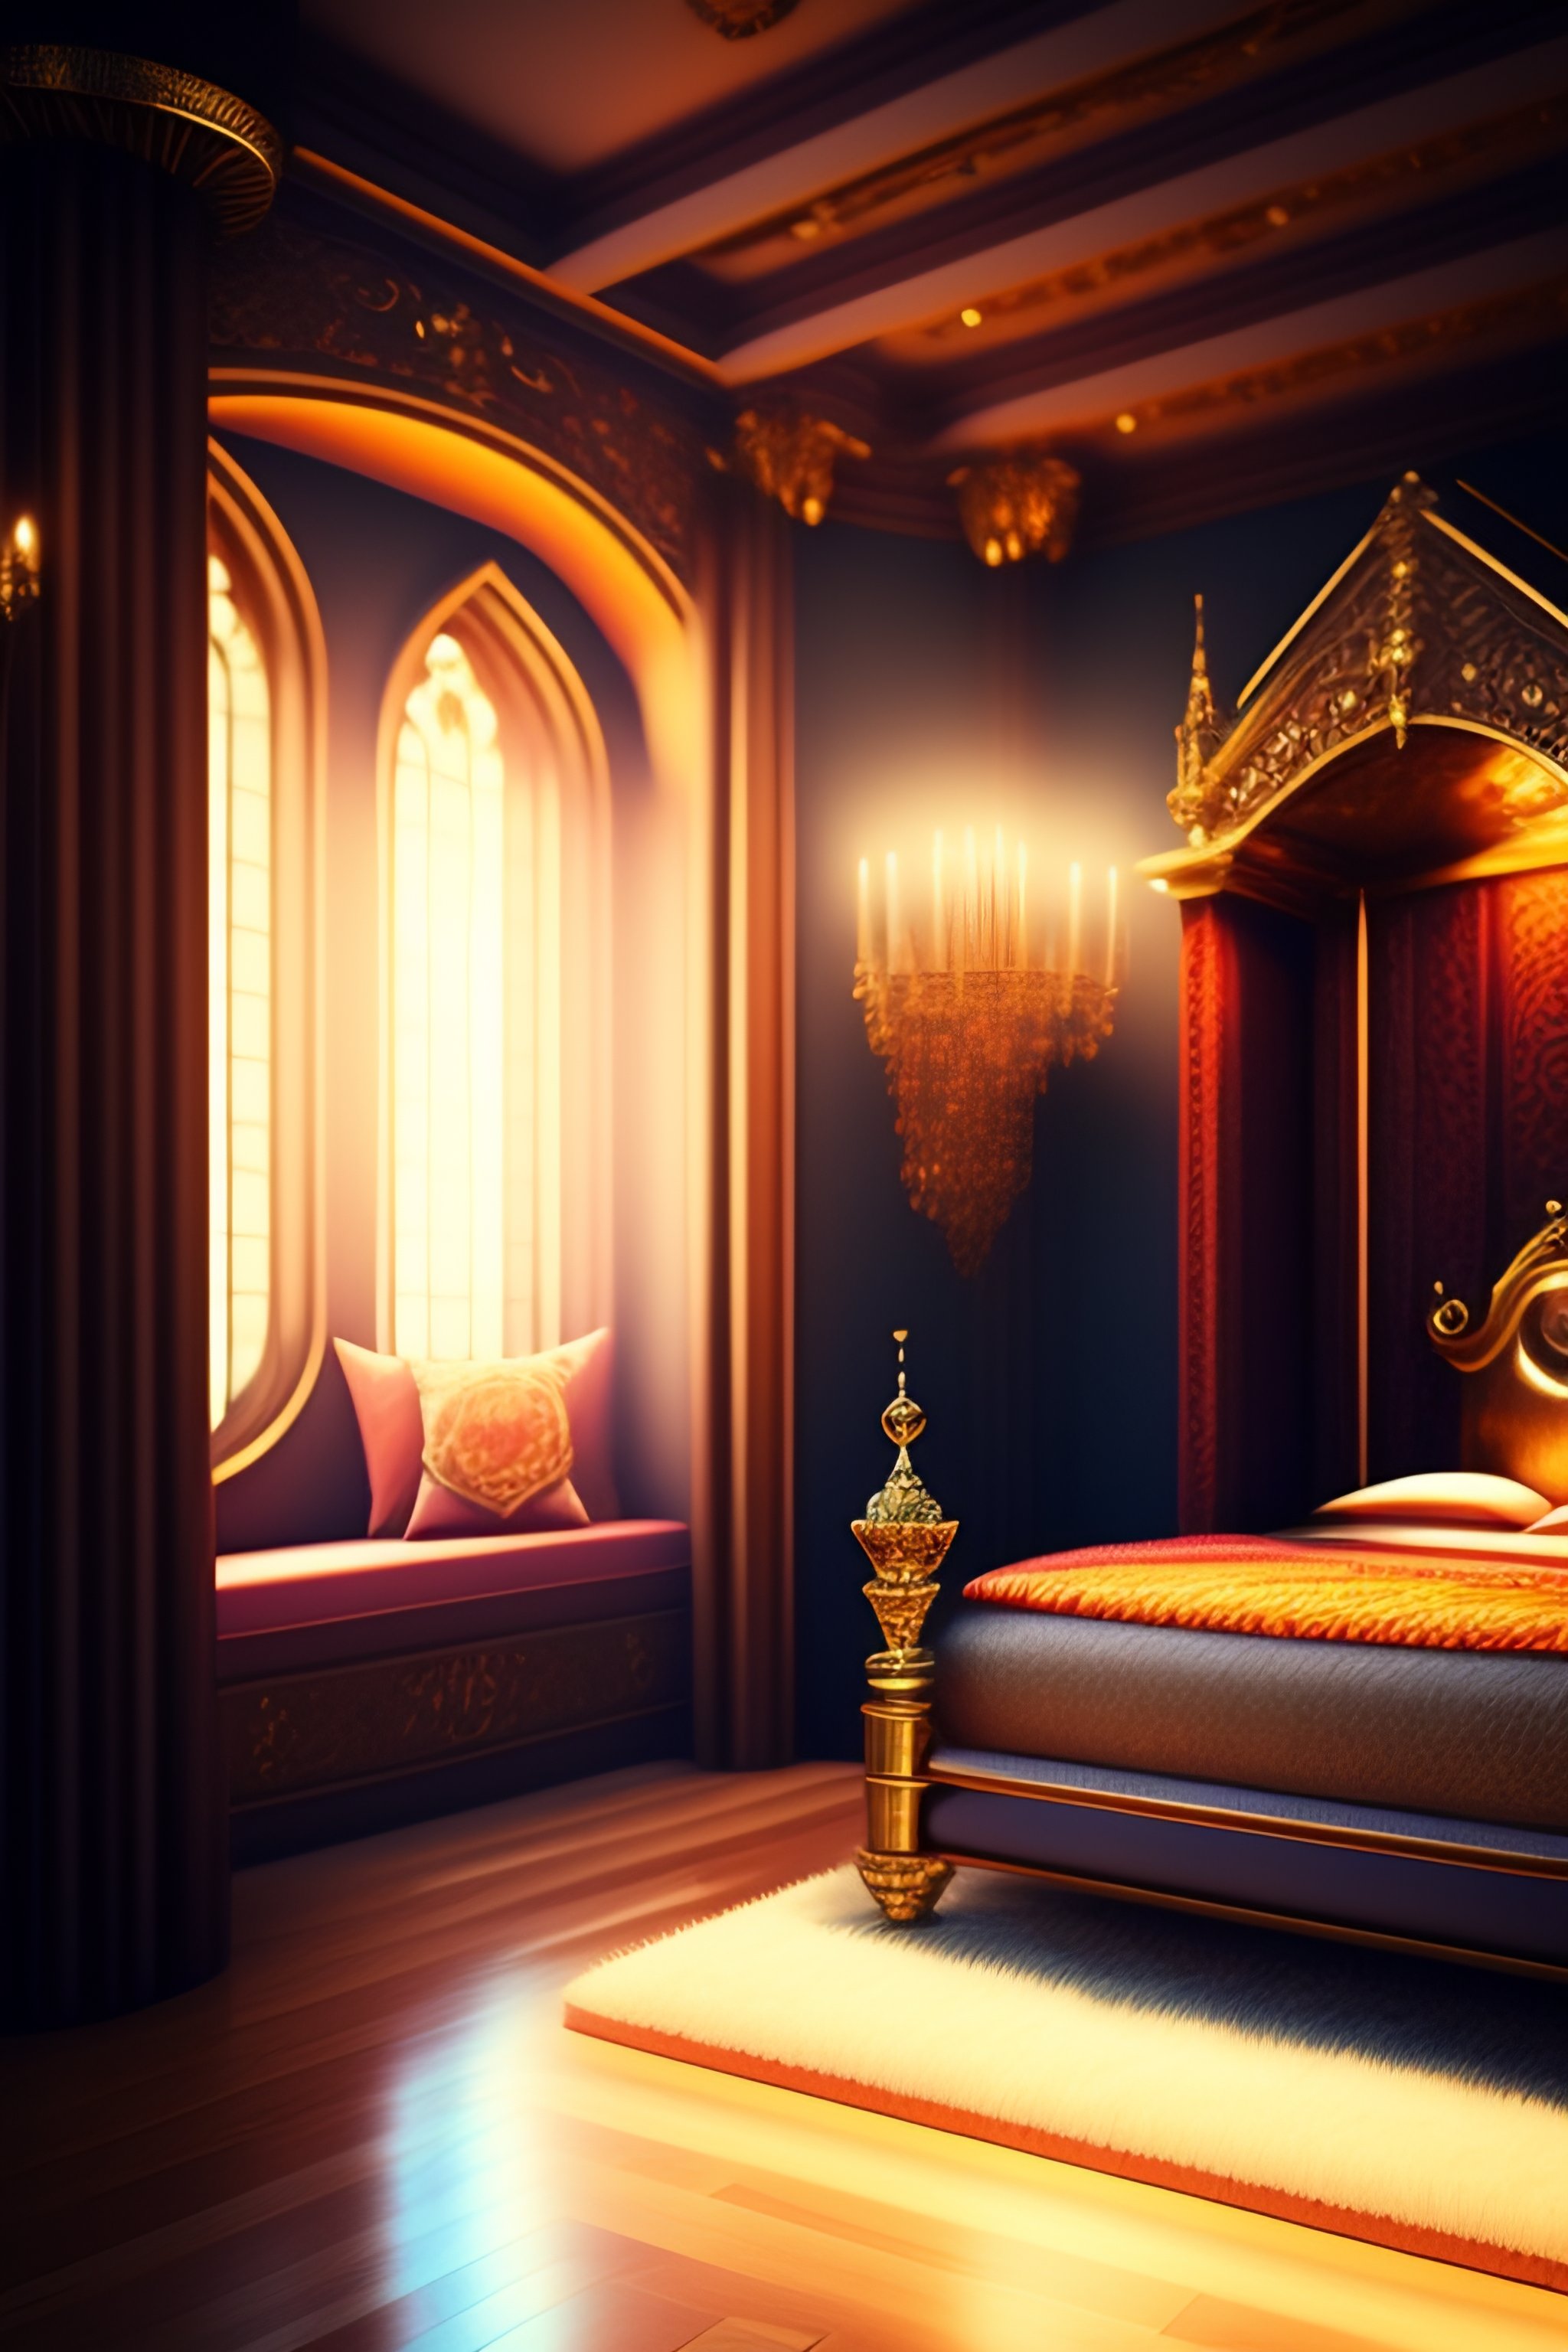 Lexica - A photo of a luxurious room in a fantasy castle